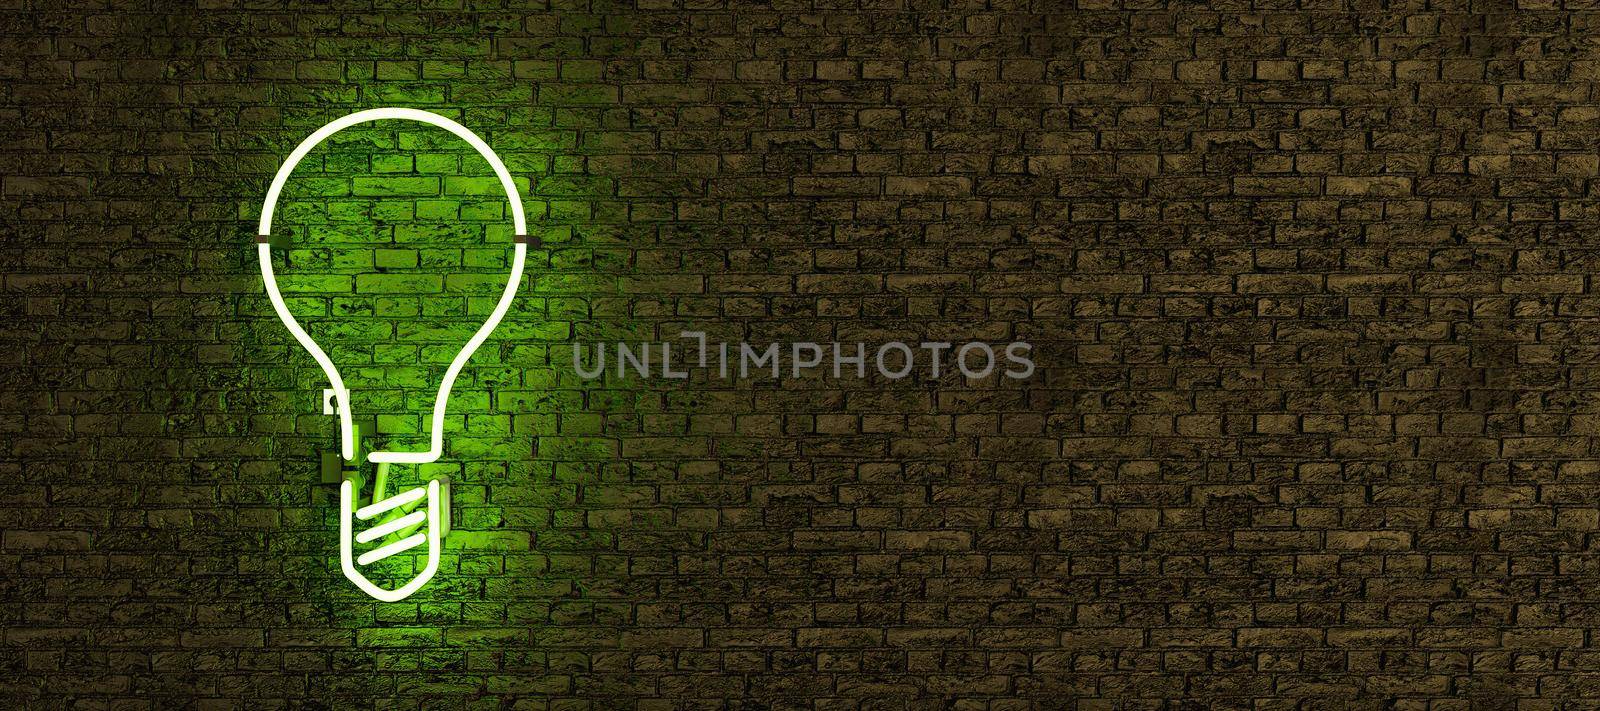 green neon lamp with light bulb symbol on brick wall with copy space. 3d rendering